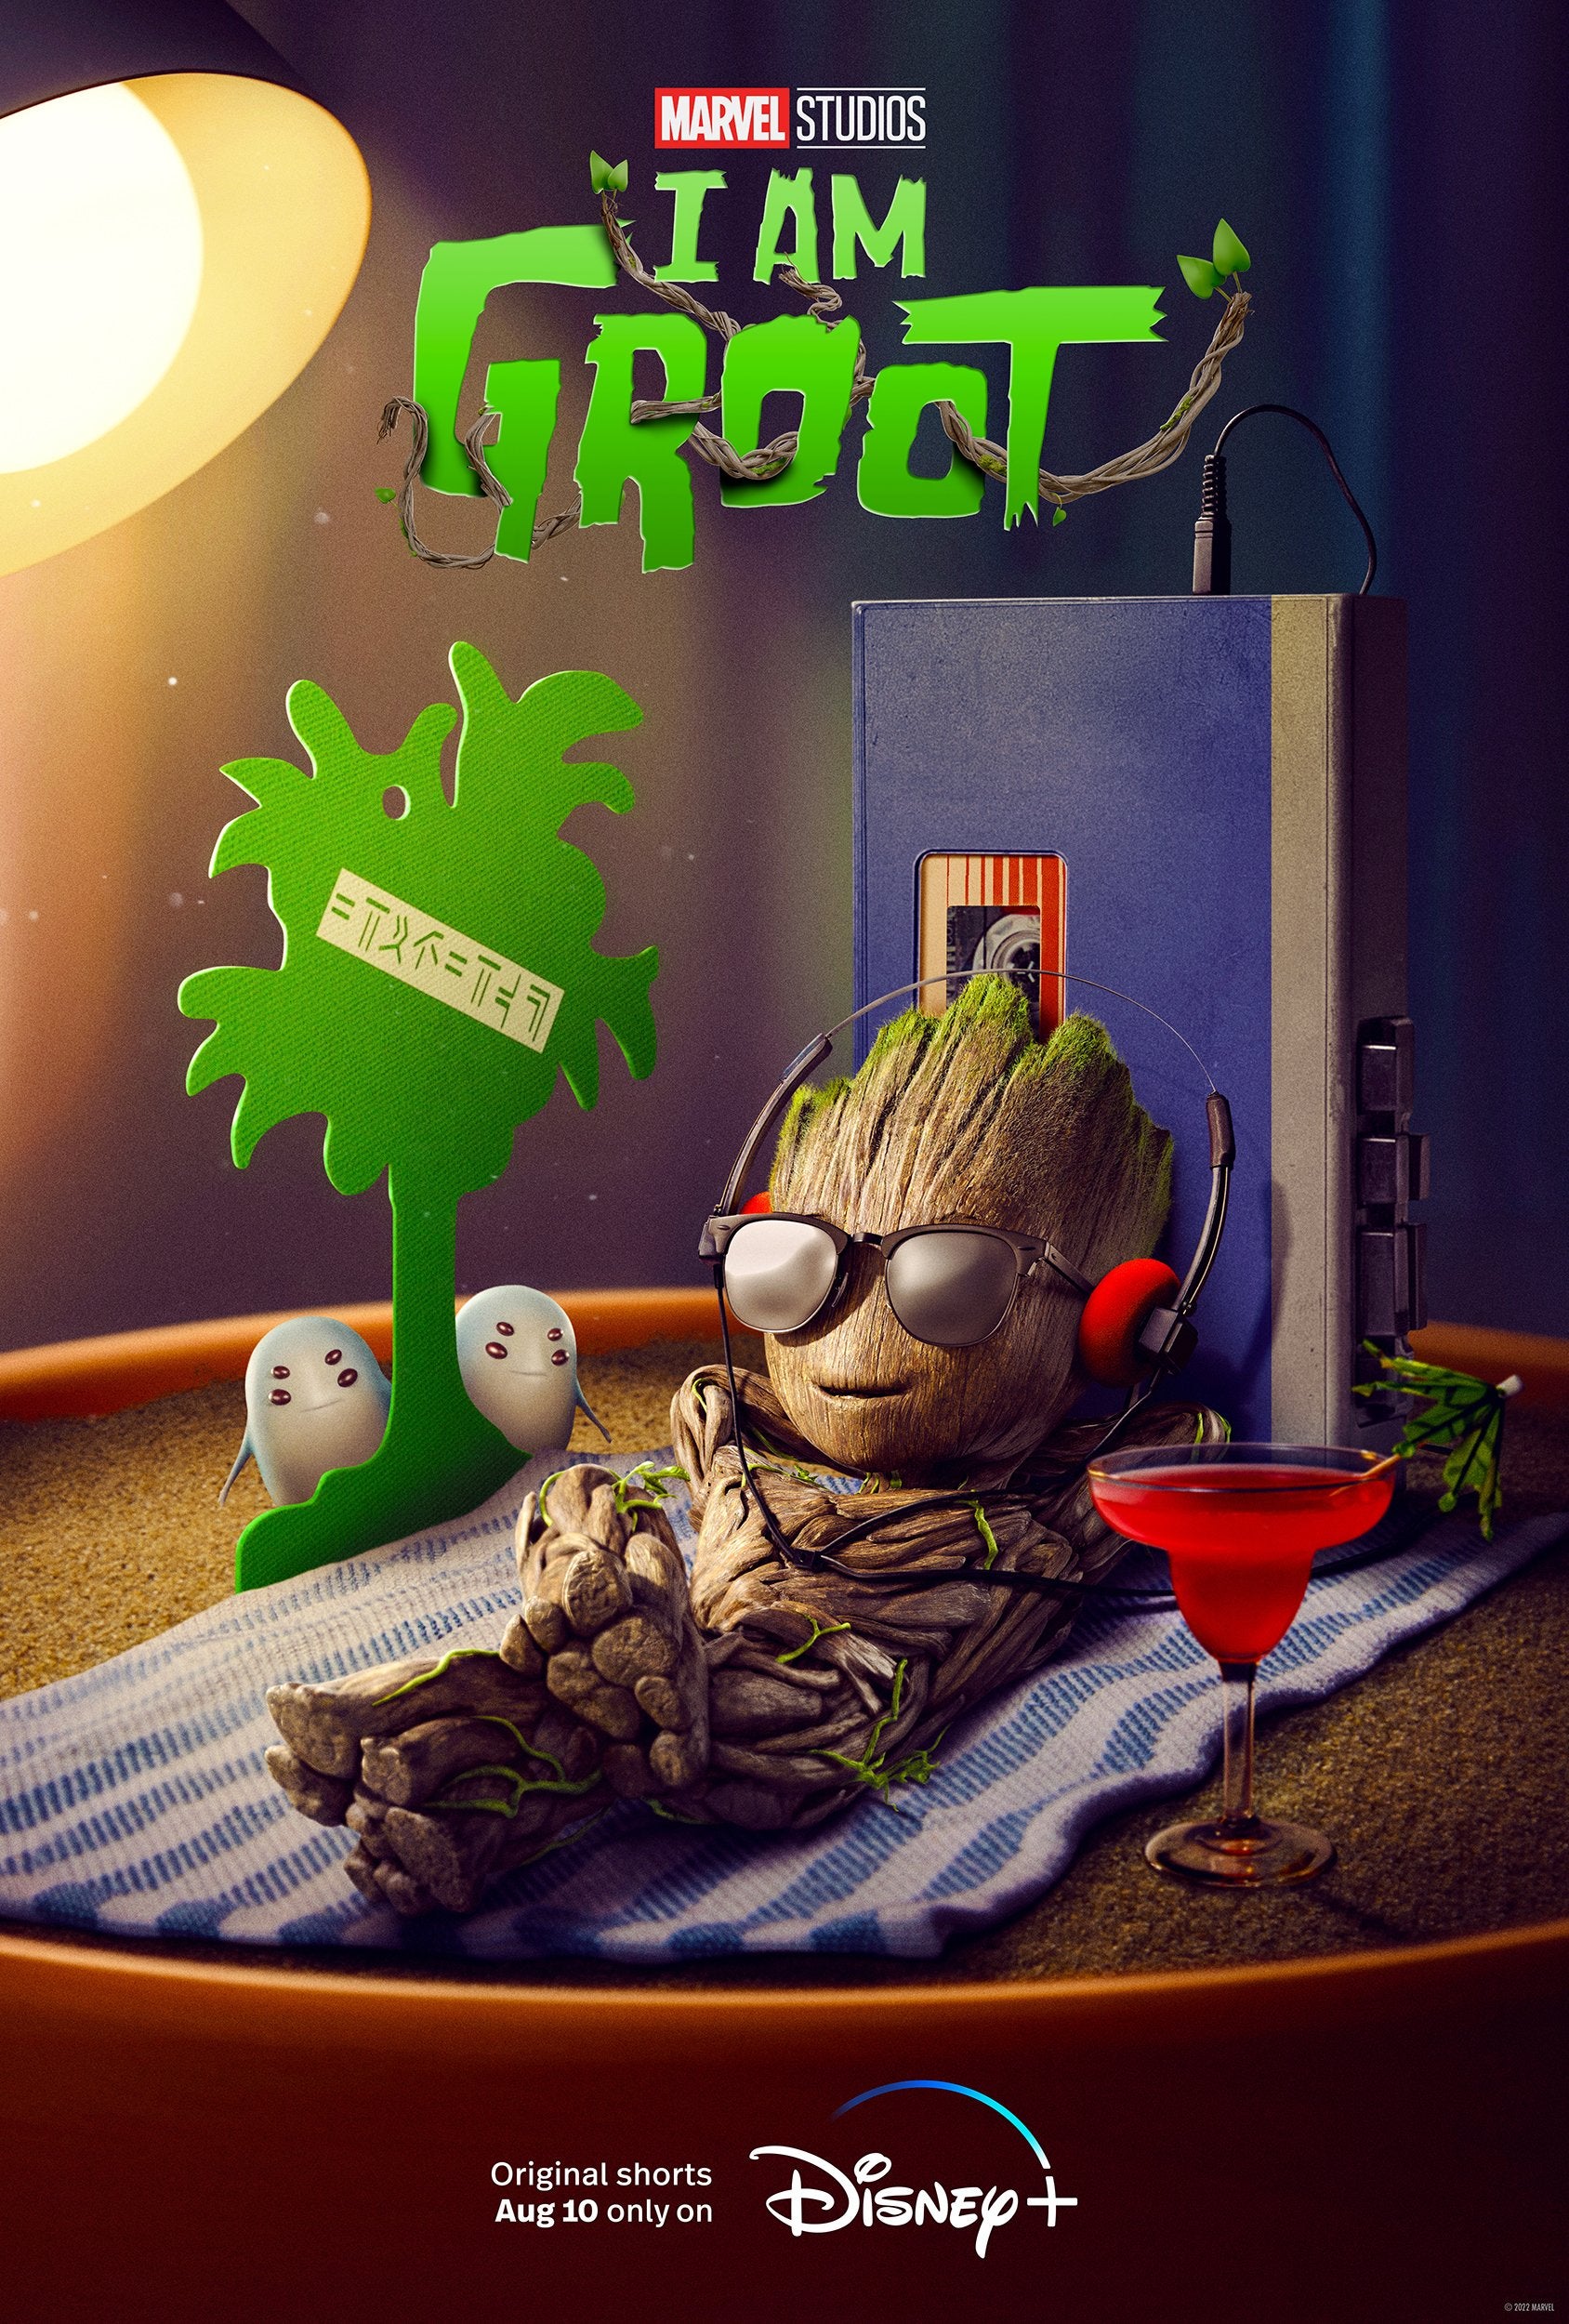 'I am Groot' poster